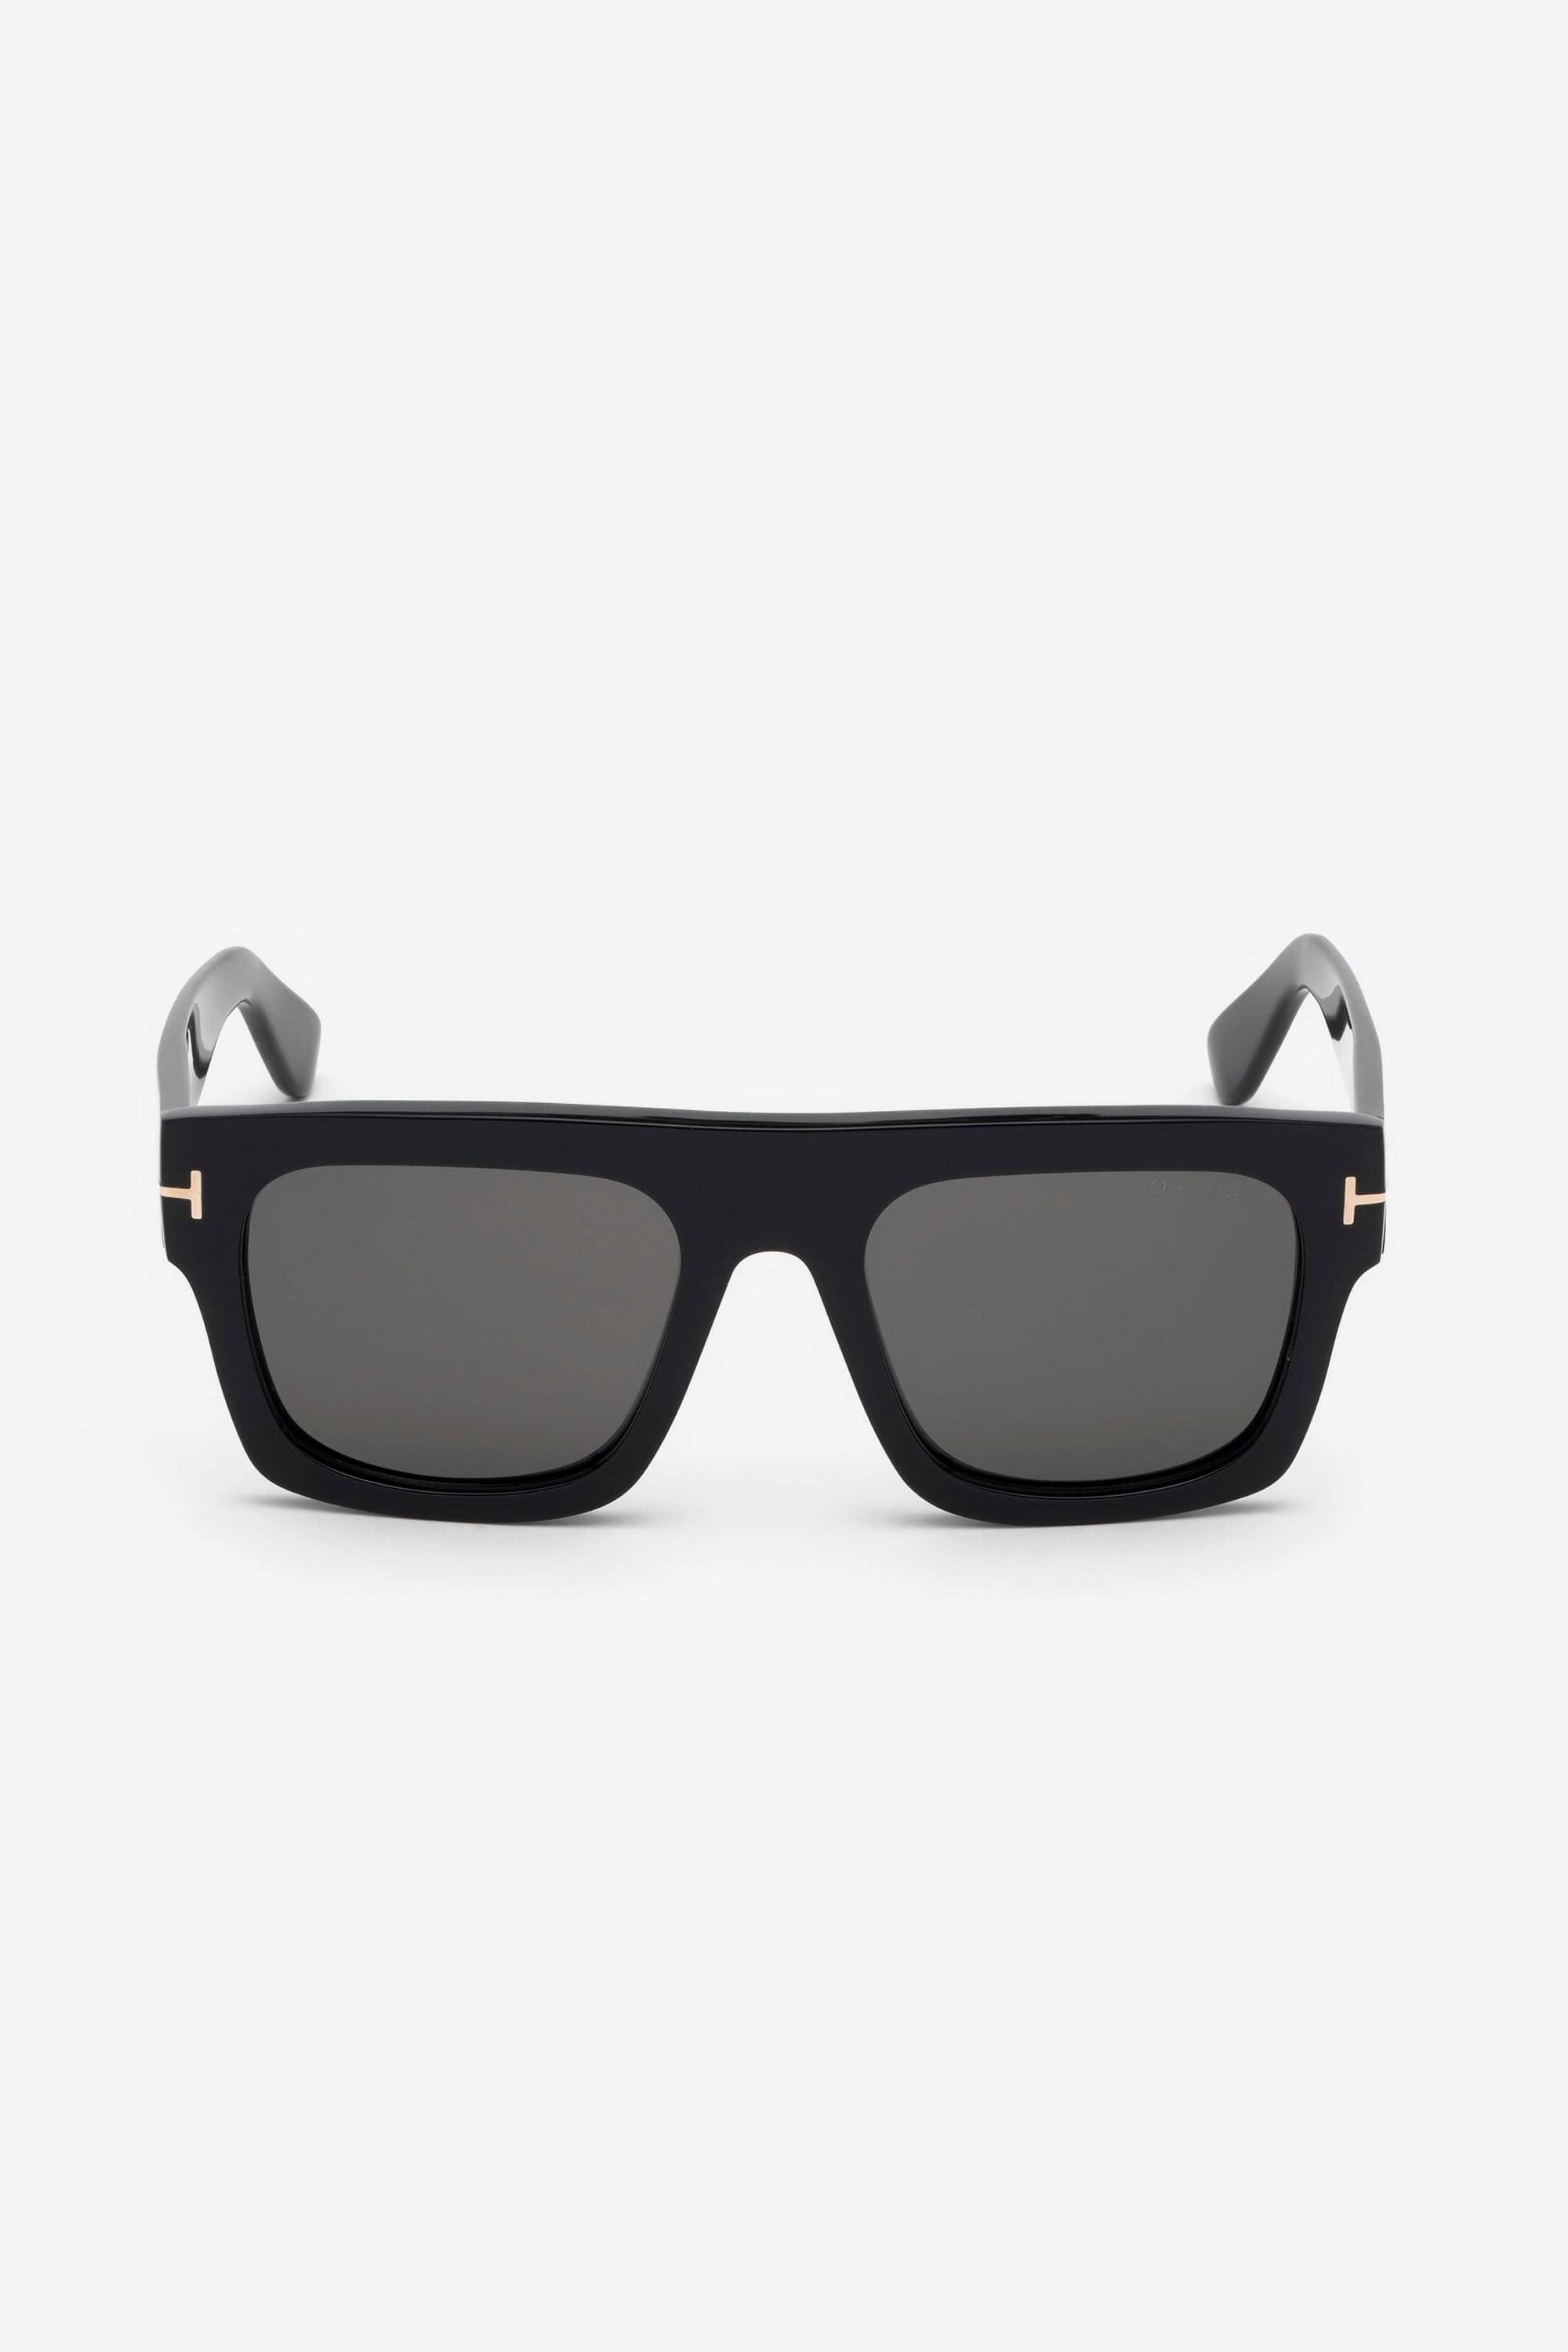 TOM FORD ICONIC FAUSTO SUNGLASSES IN BLACK